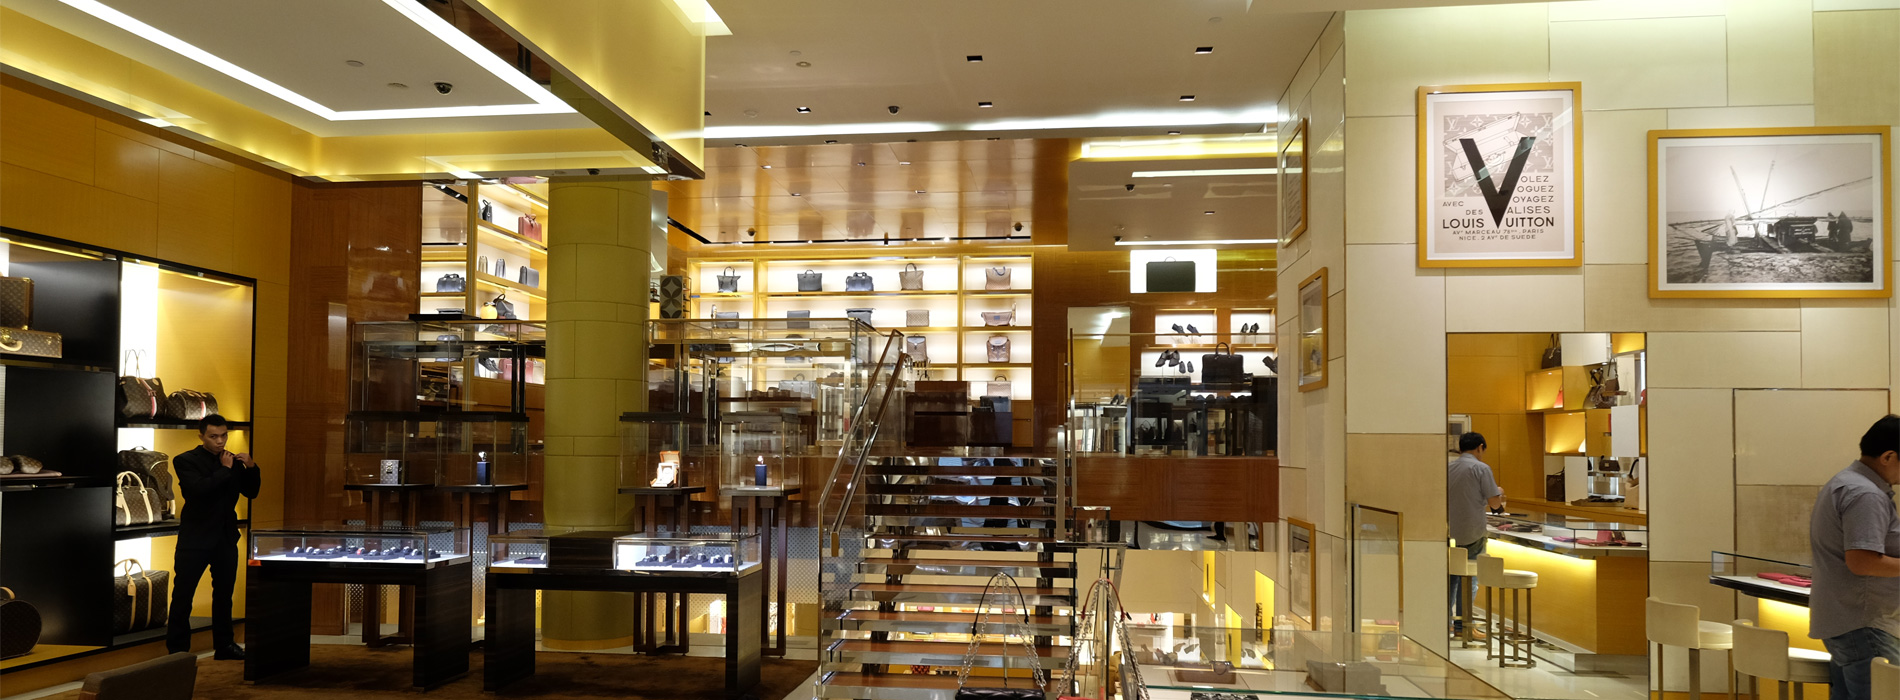 Louis Vuitton | Project | RCHITECTS, Inc. | Architectural Firm Philippines